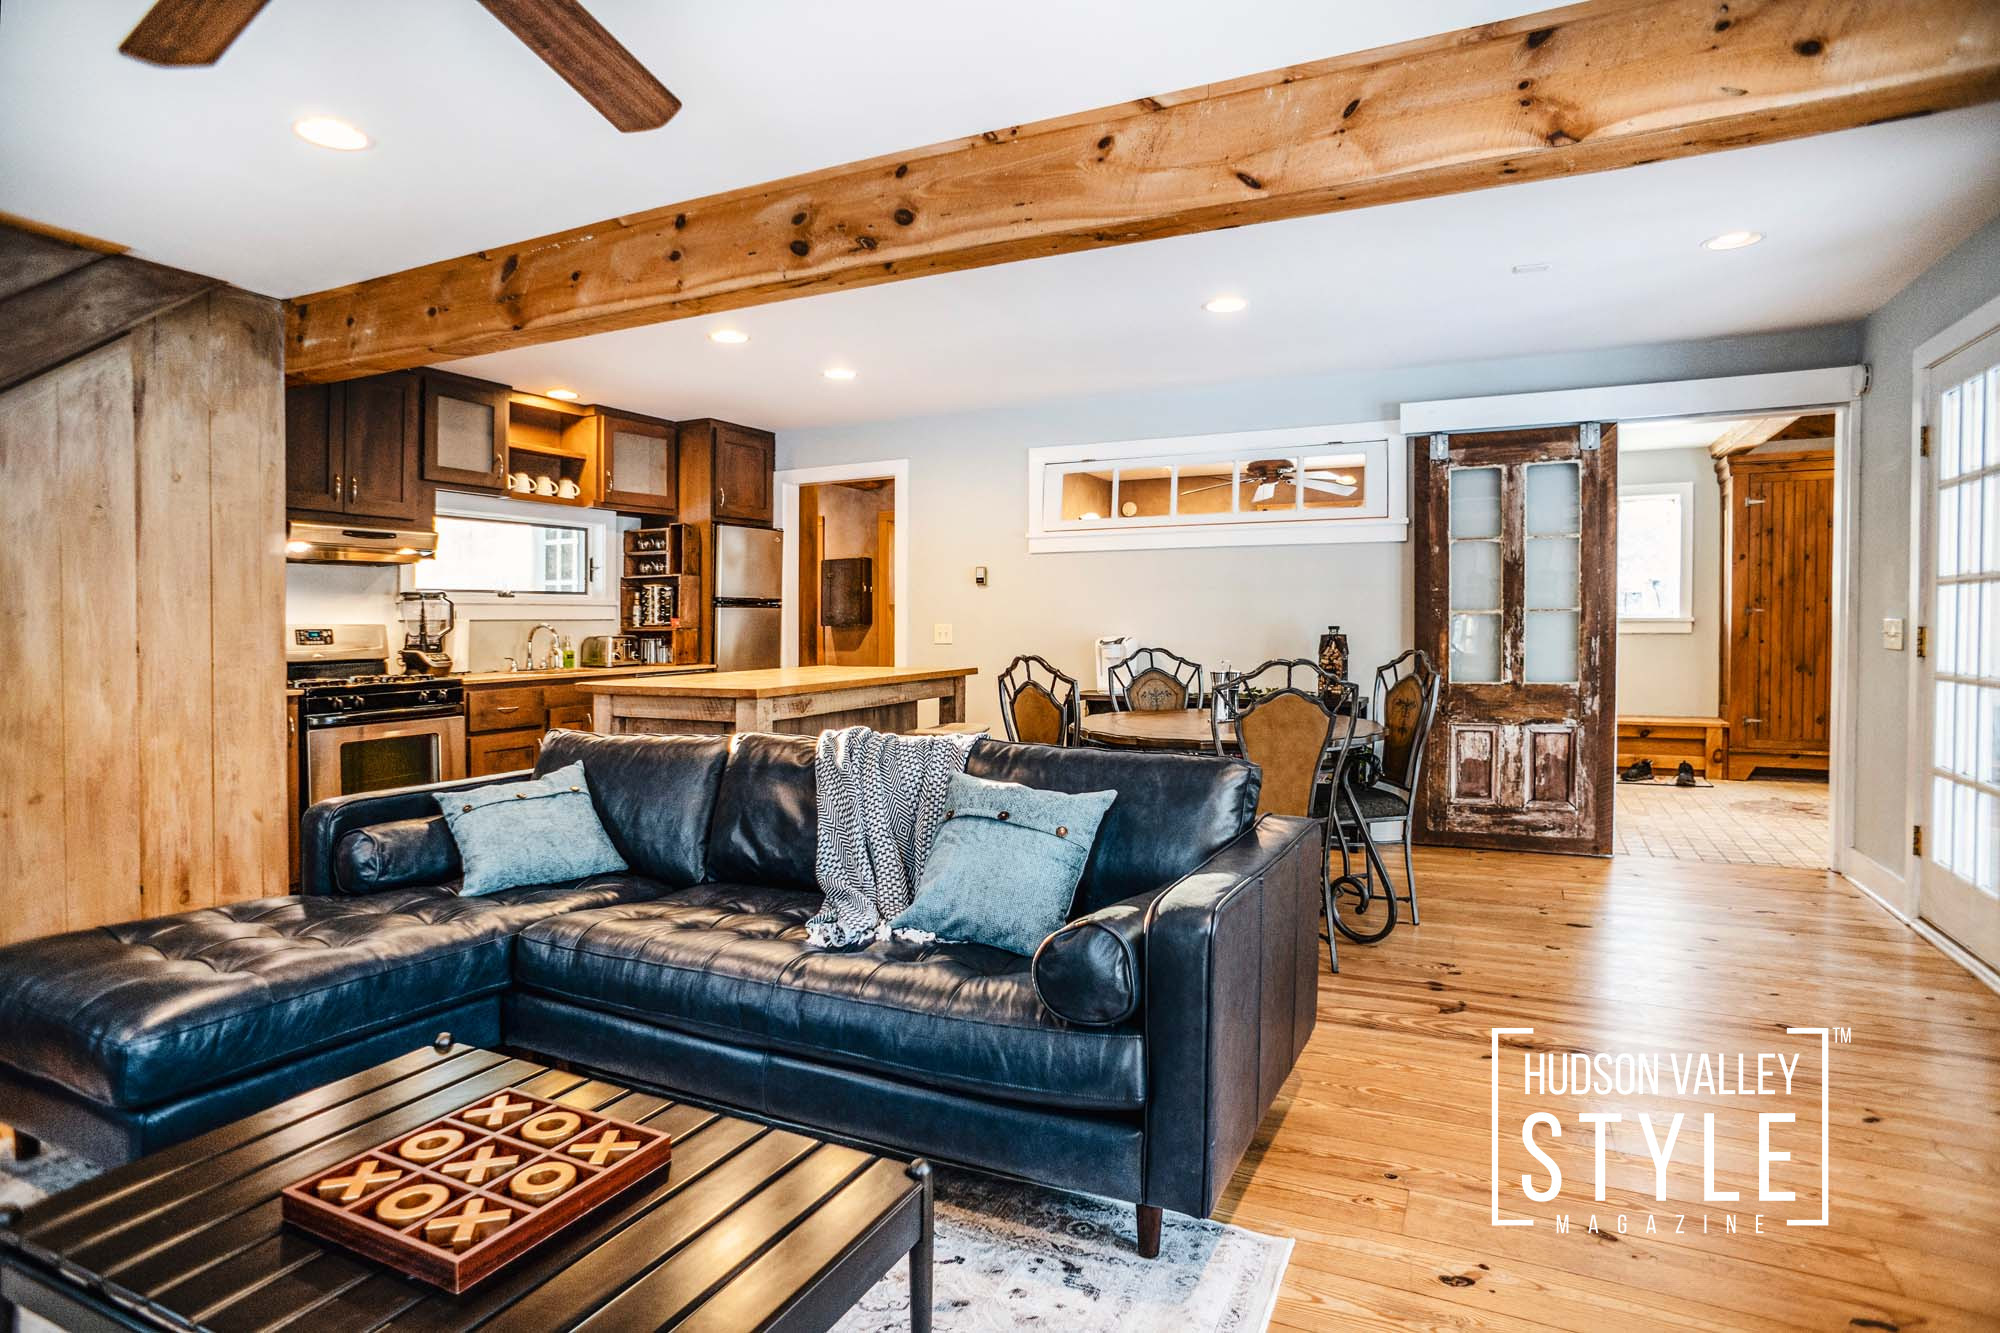 Hudson Valley Getaway – Rustic Cabin in the Shawangunk Mountains | Hudson Valley Style Magazine Airbnb Tour | Photography by ALLUVION Real Estate